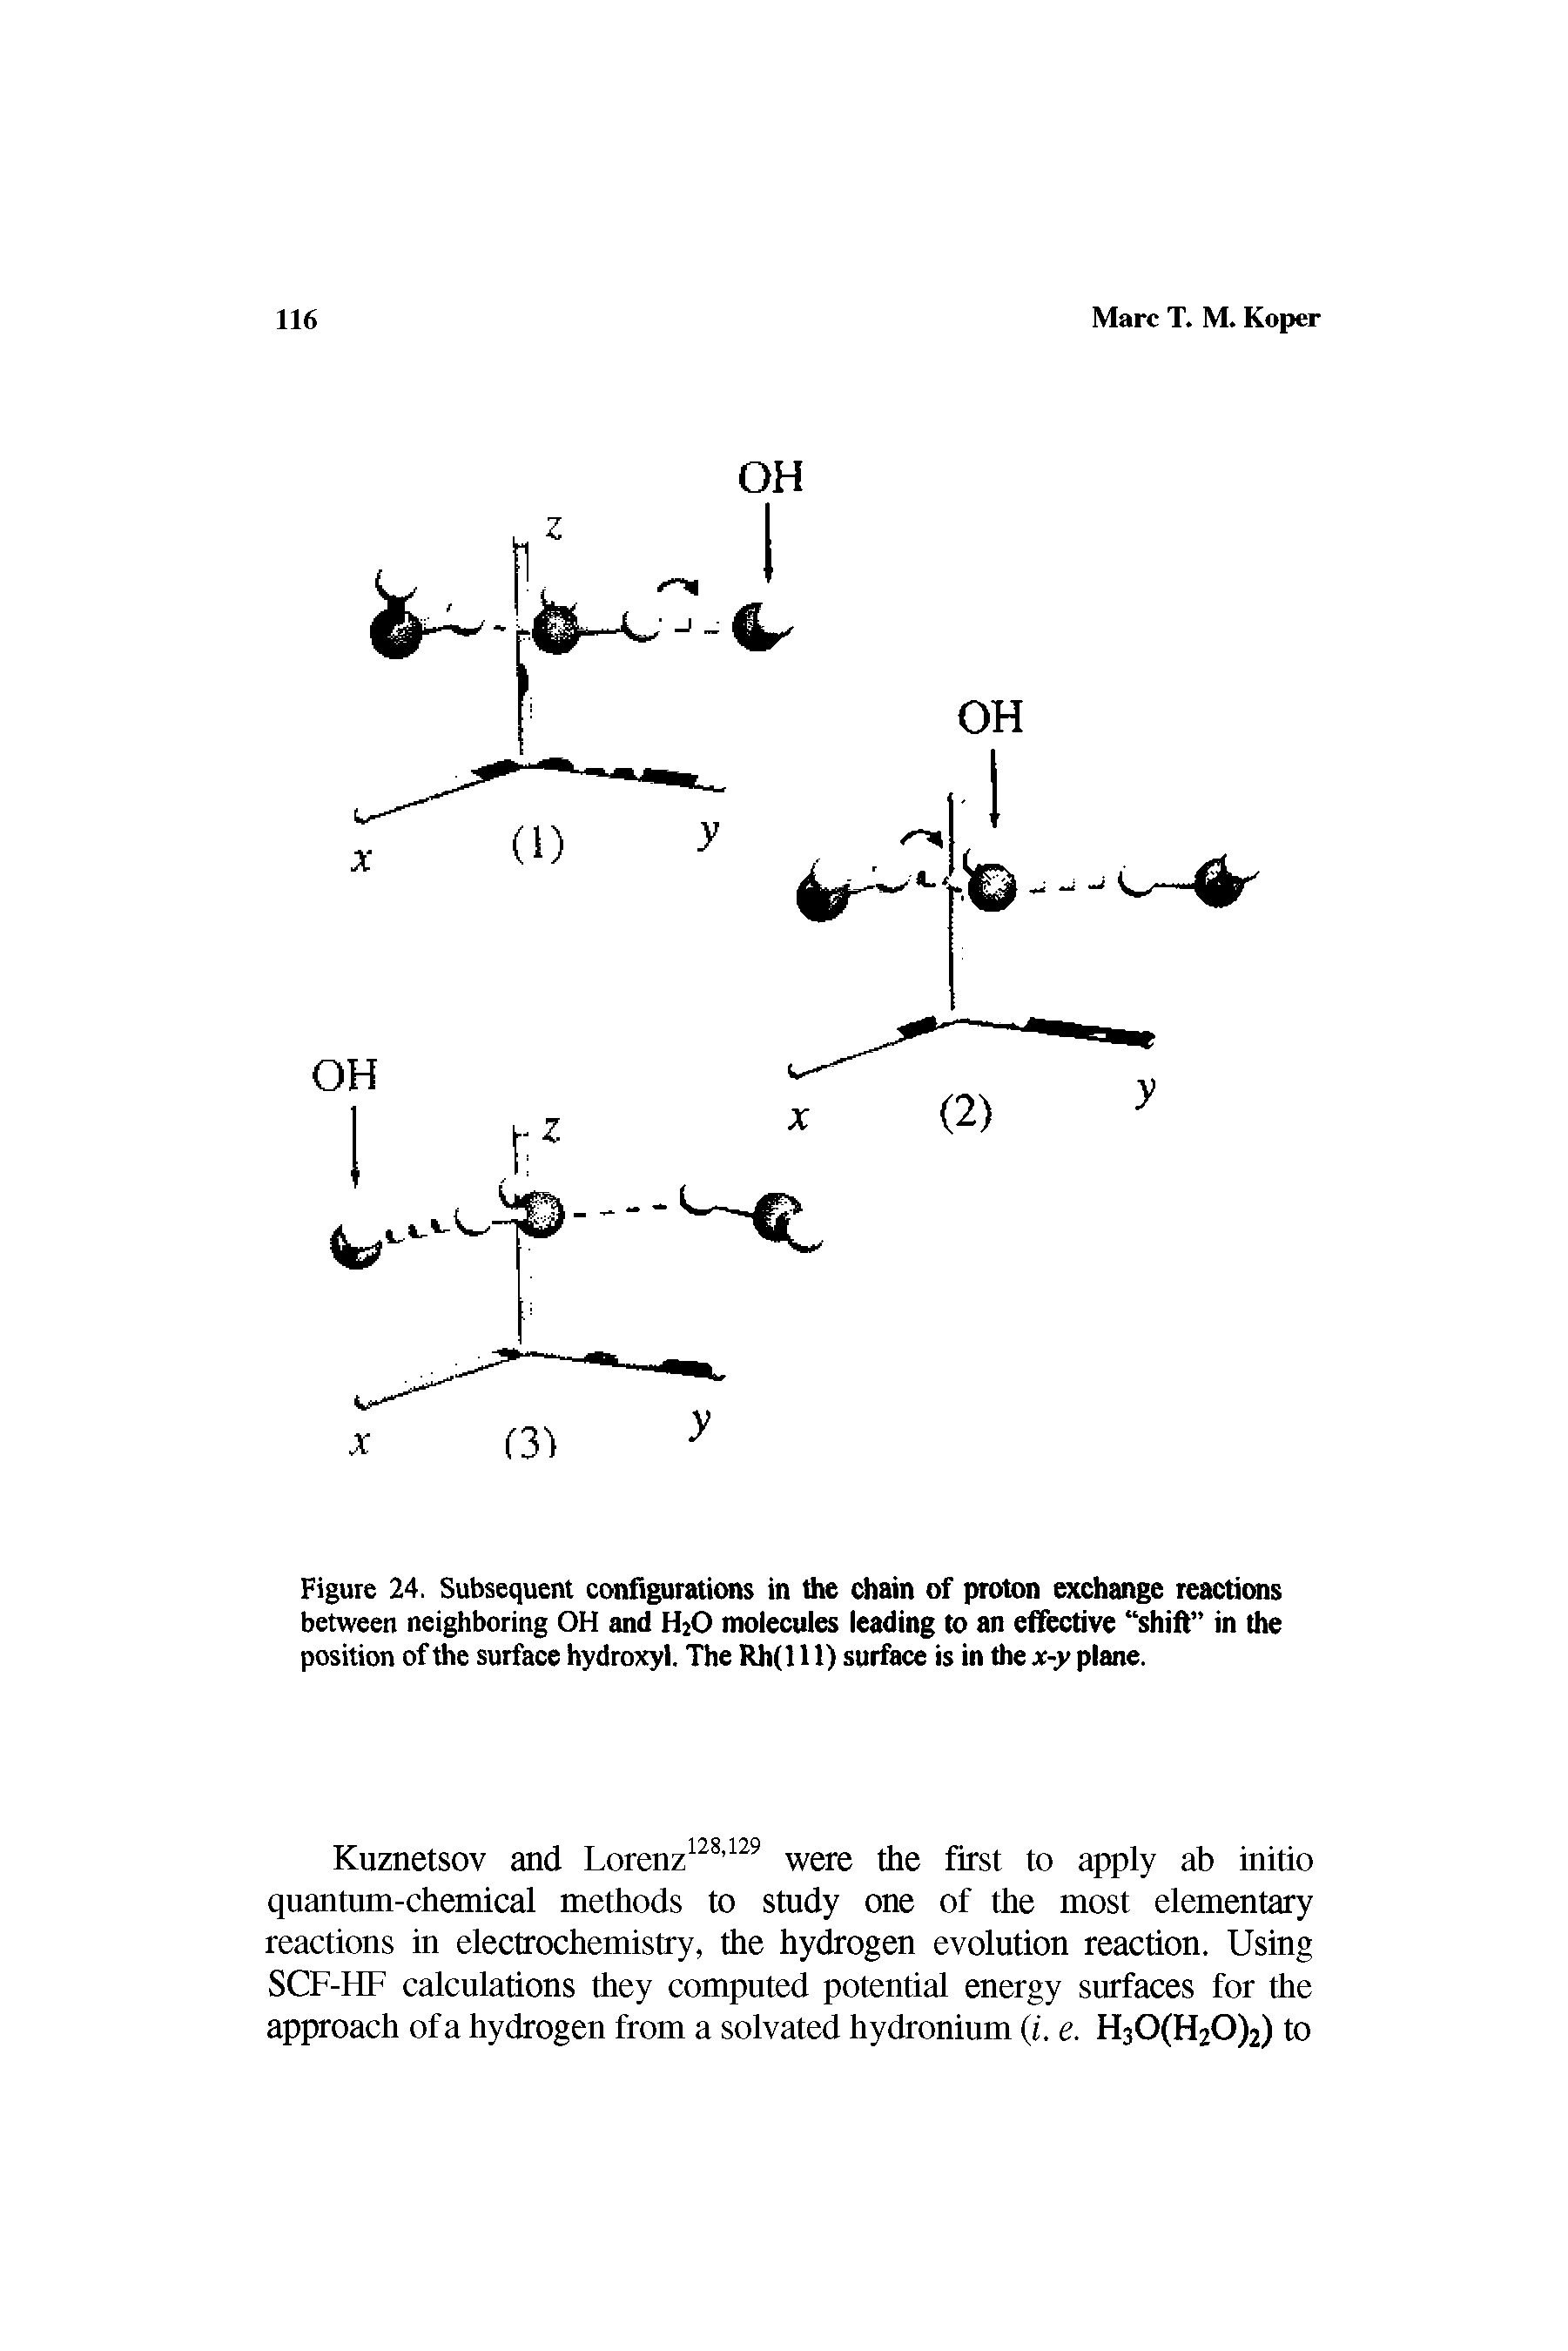 Figure 24. Subsequent configurations in the chain of proton exchange reactions between neighboring OH and H2O molecules leading to an effective shift in the position of the surface hydroxyl. The Rh(l 11) surface is in the x-y plane.